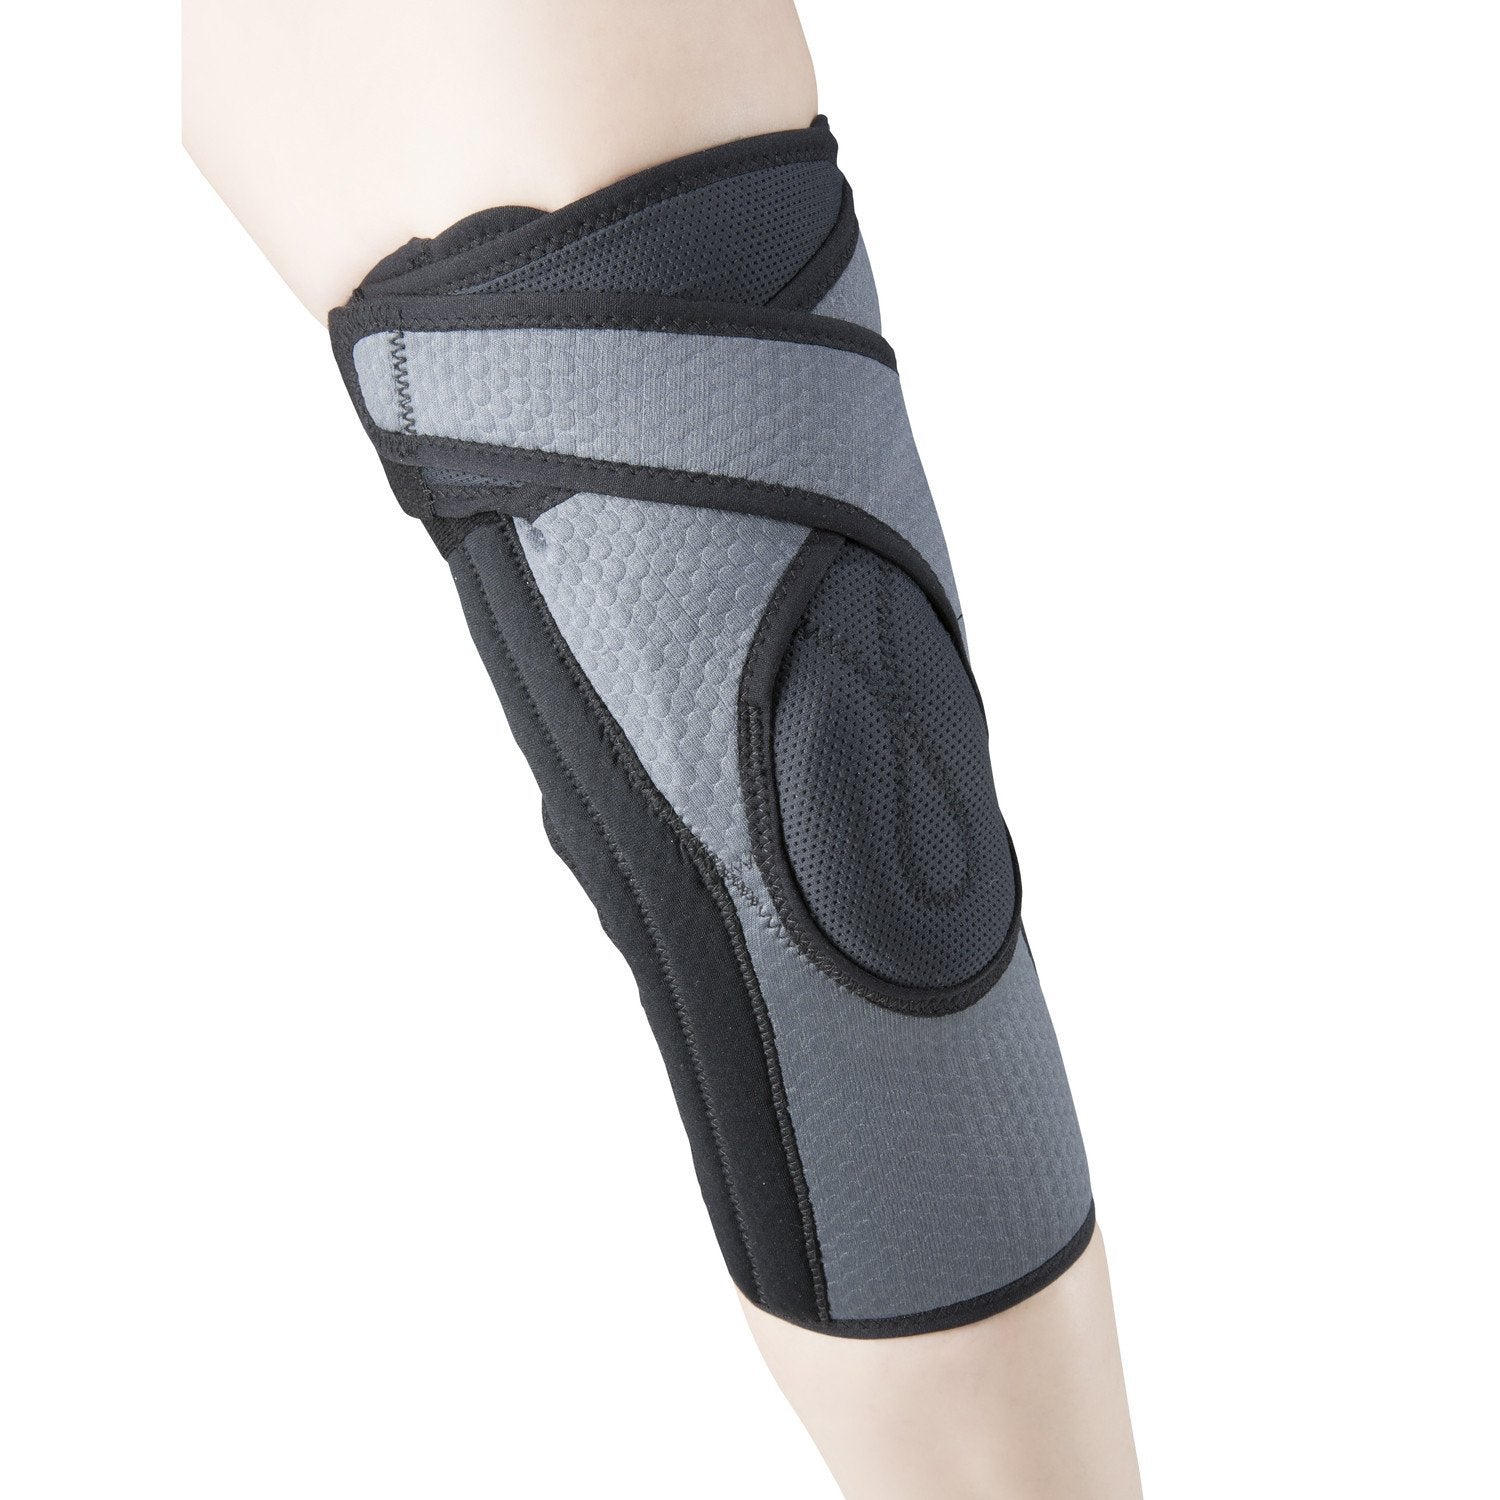 AIR 2550-S EA/1 KNEE SUPPORT WITH PATELLA UPLIFT, GREY, SMALL